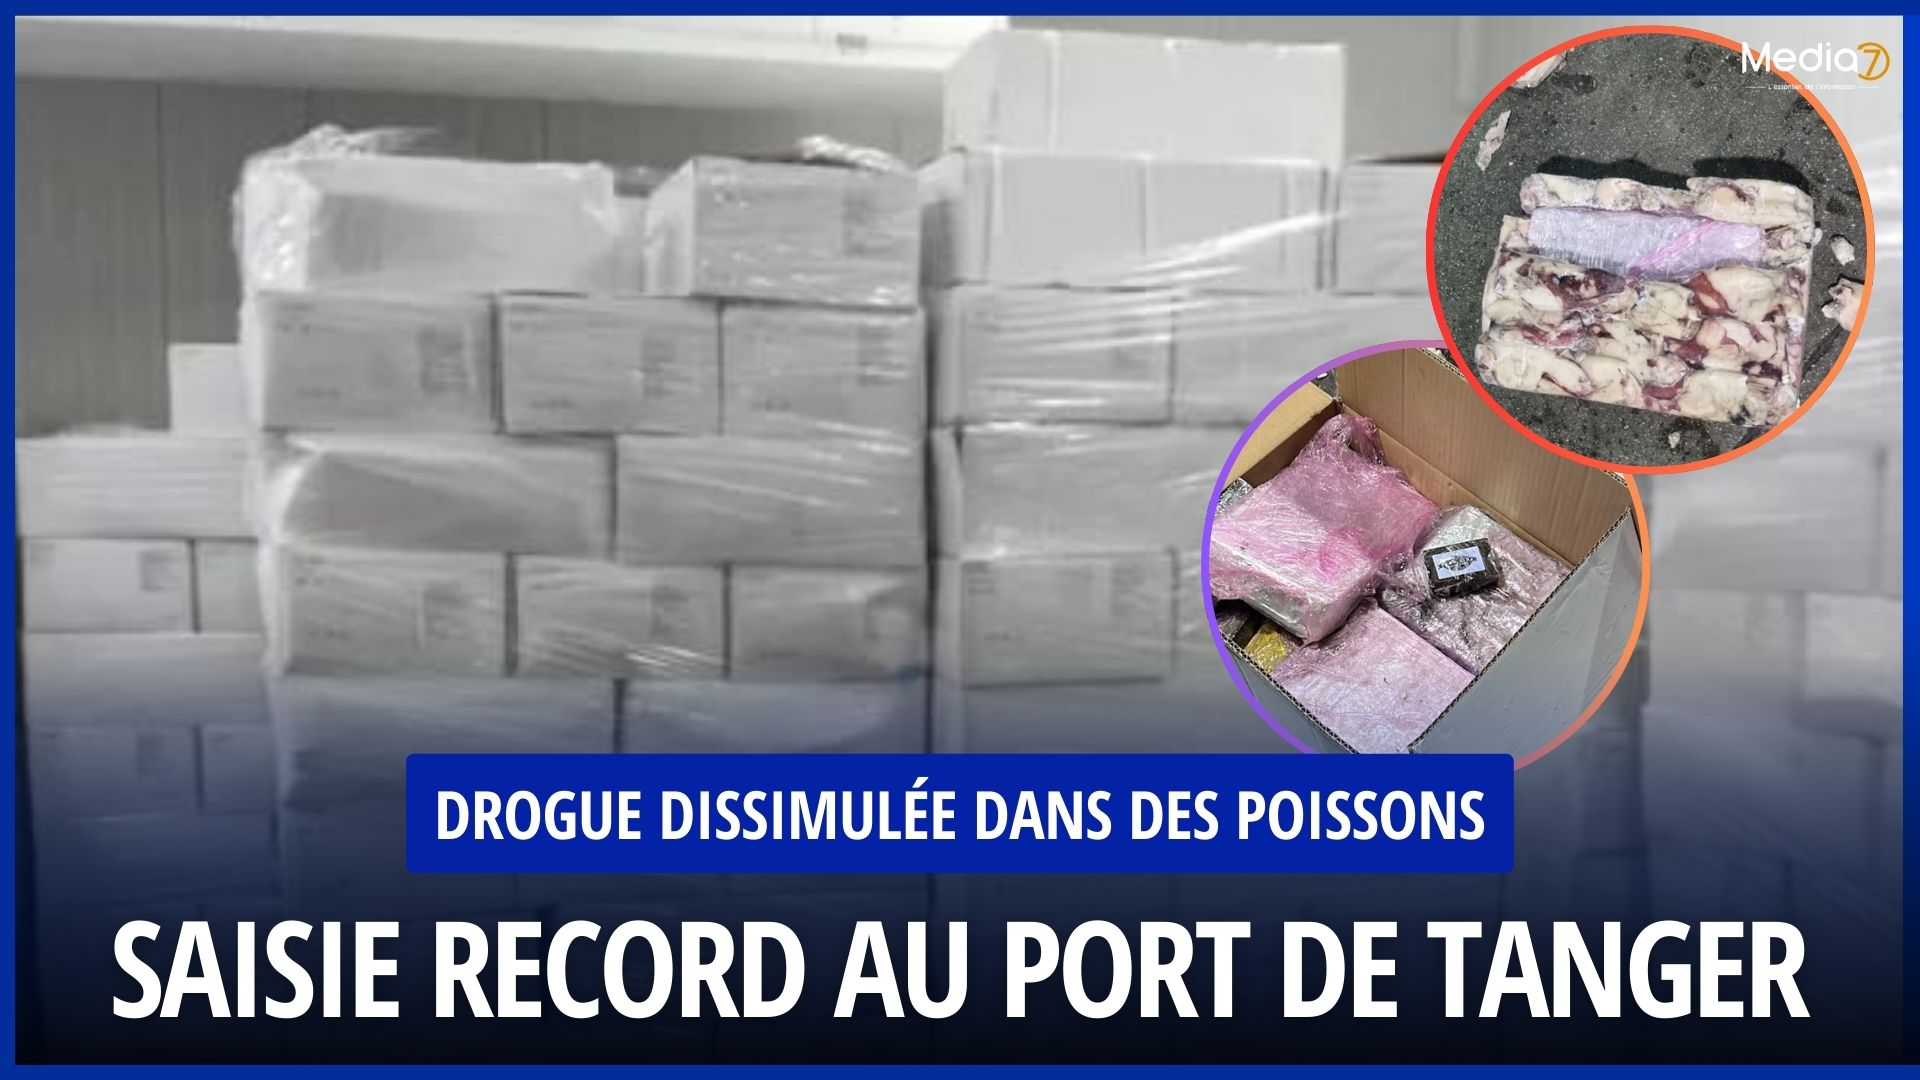 Record Seizure of Cannabis Concealed in a Load of Fish at the Port of Tangier